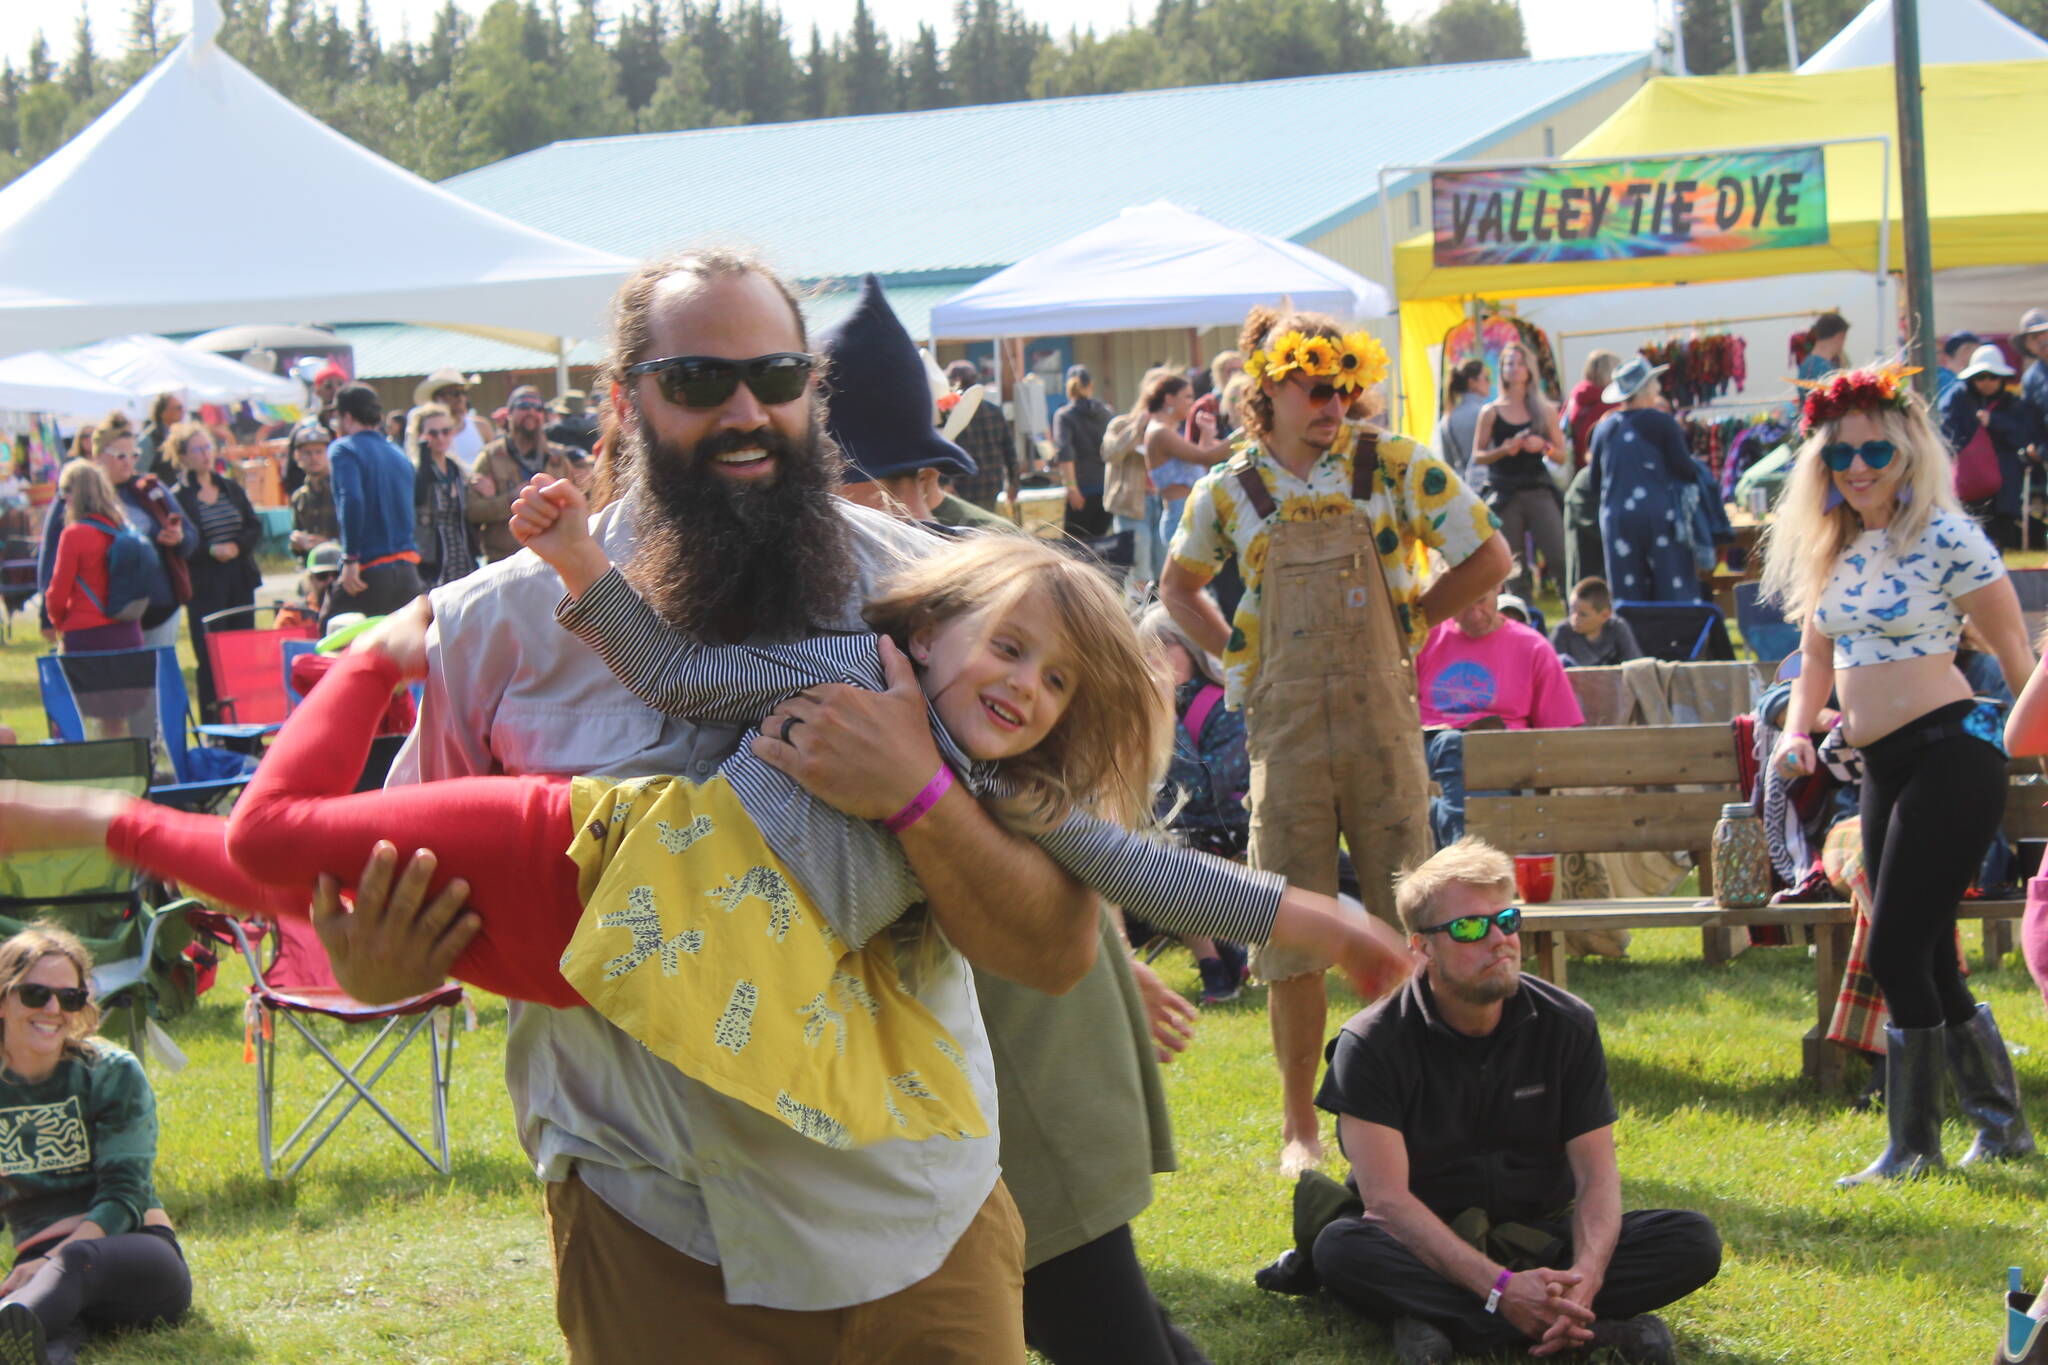 People gather in Ninilchik, Alaska on Friday, Aug. 5, 2022 for Salmonfest, an annual event that raises awareness about salmon-related causes. (Camille Botello/Peninsula Clarion)